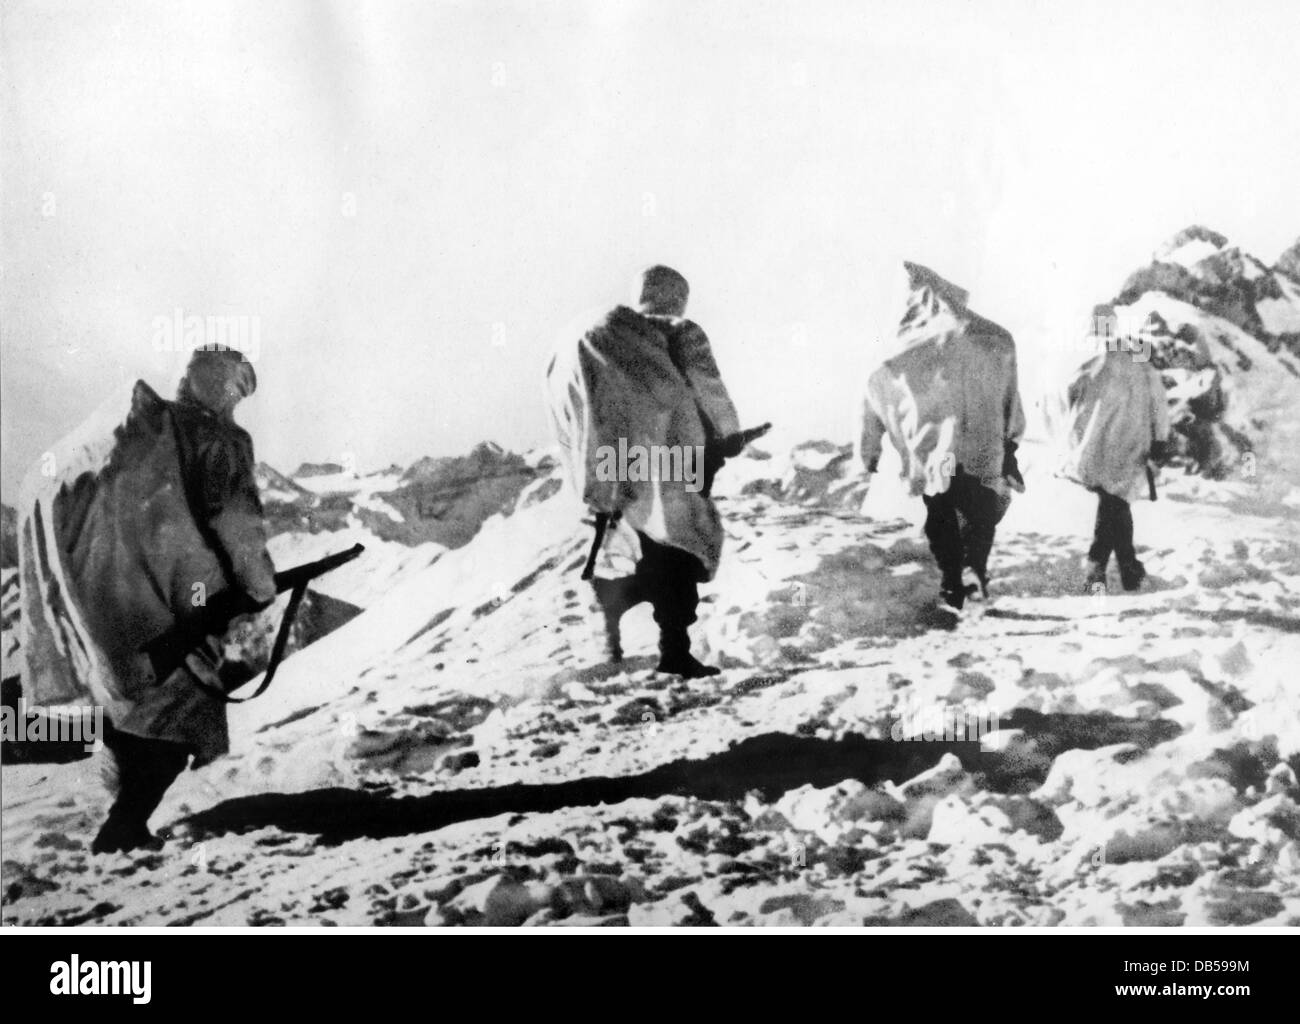 events, Second World War / WWII, Germany, Wehrmacht, mountain infantry on a peak during the training, Third Reich, warfare, Eastern Front, soldiers, reconnaissance patrol, winter, snow camouflage clothing, dress, 20th century, historic, historical, people, 1930s, 1940s, Additional-Rights-Clearences-Not Available Stock Photo